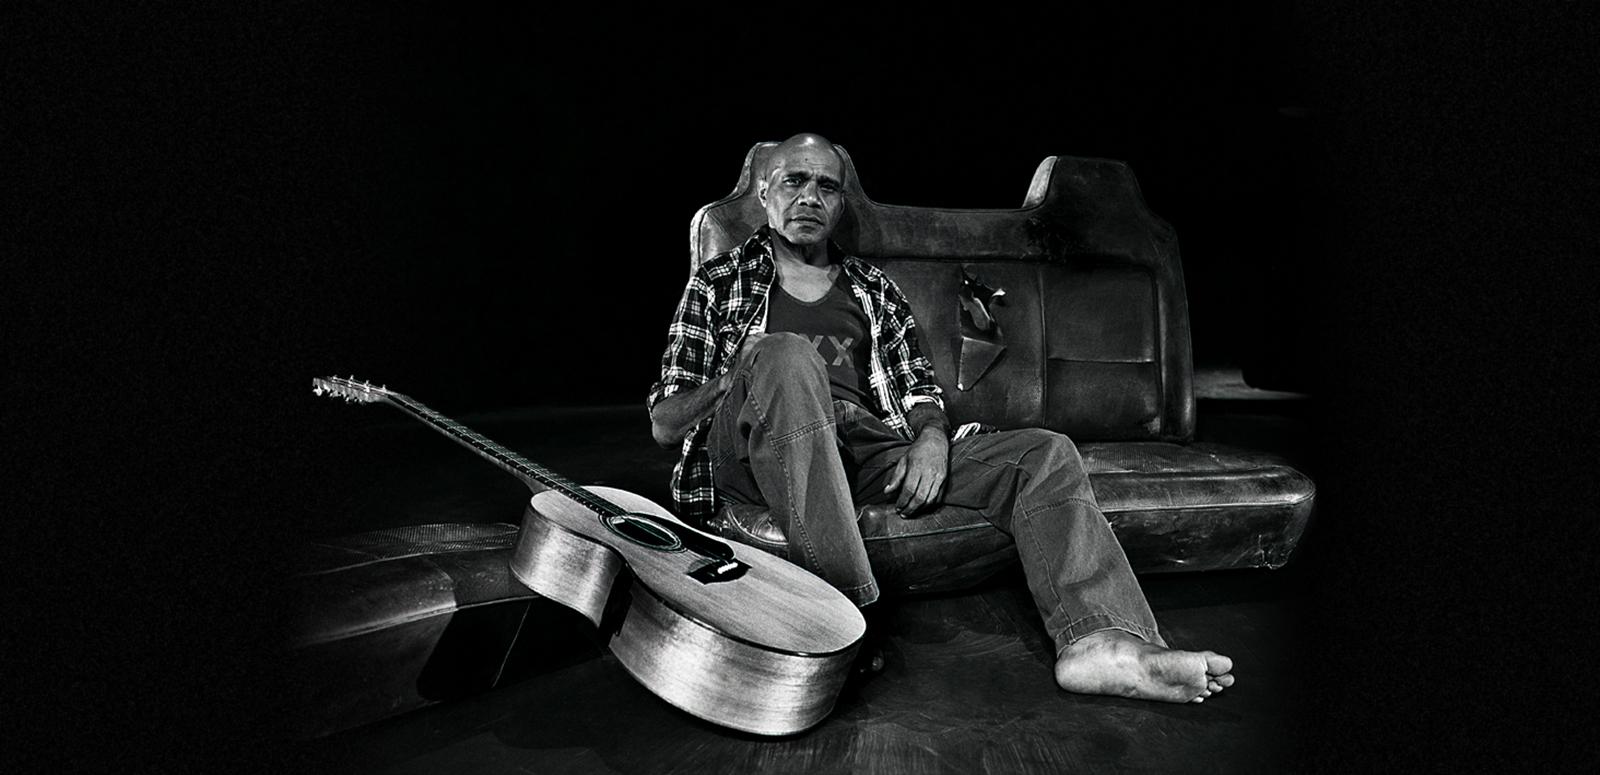 Archie Roach rests against an old car seat in a studio with his guitar resting nearby.